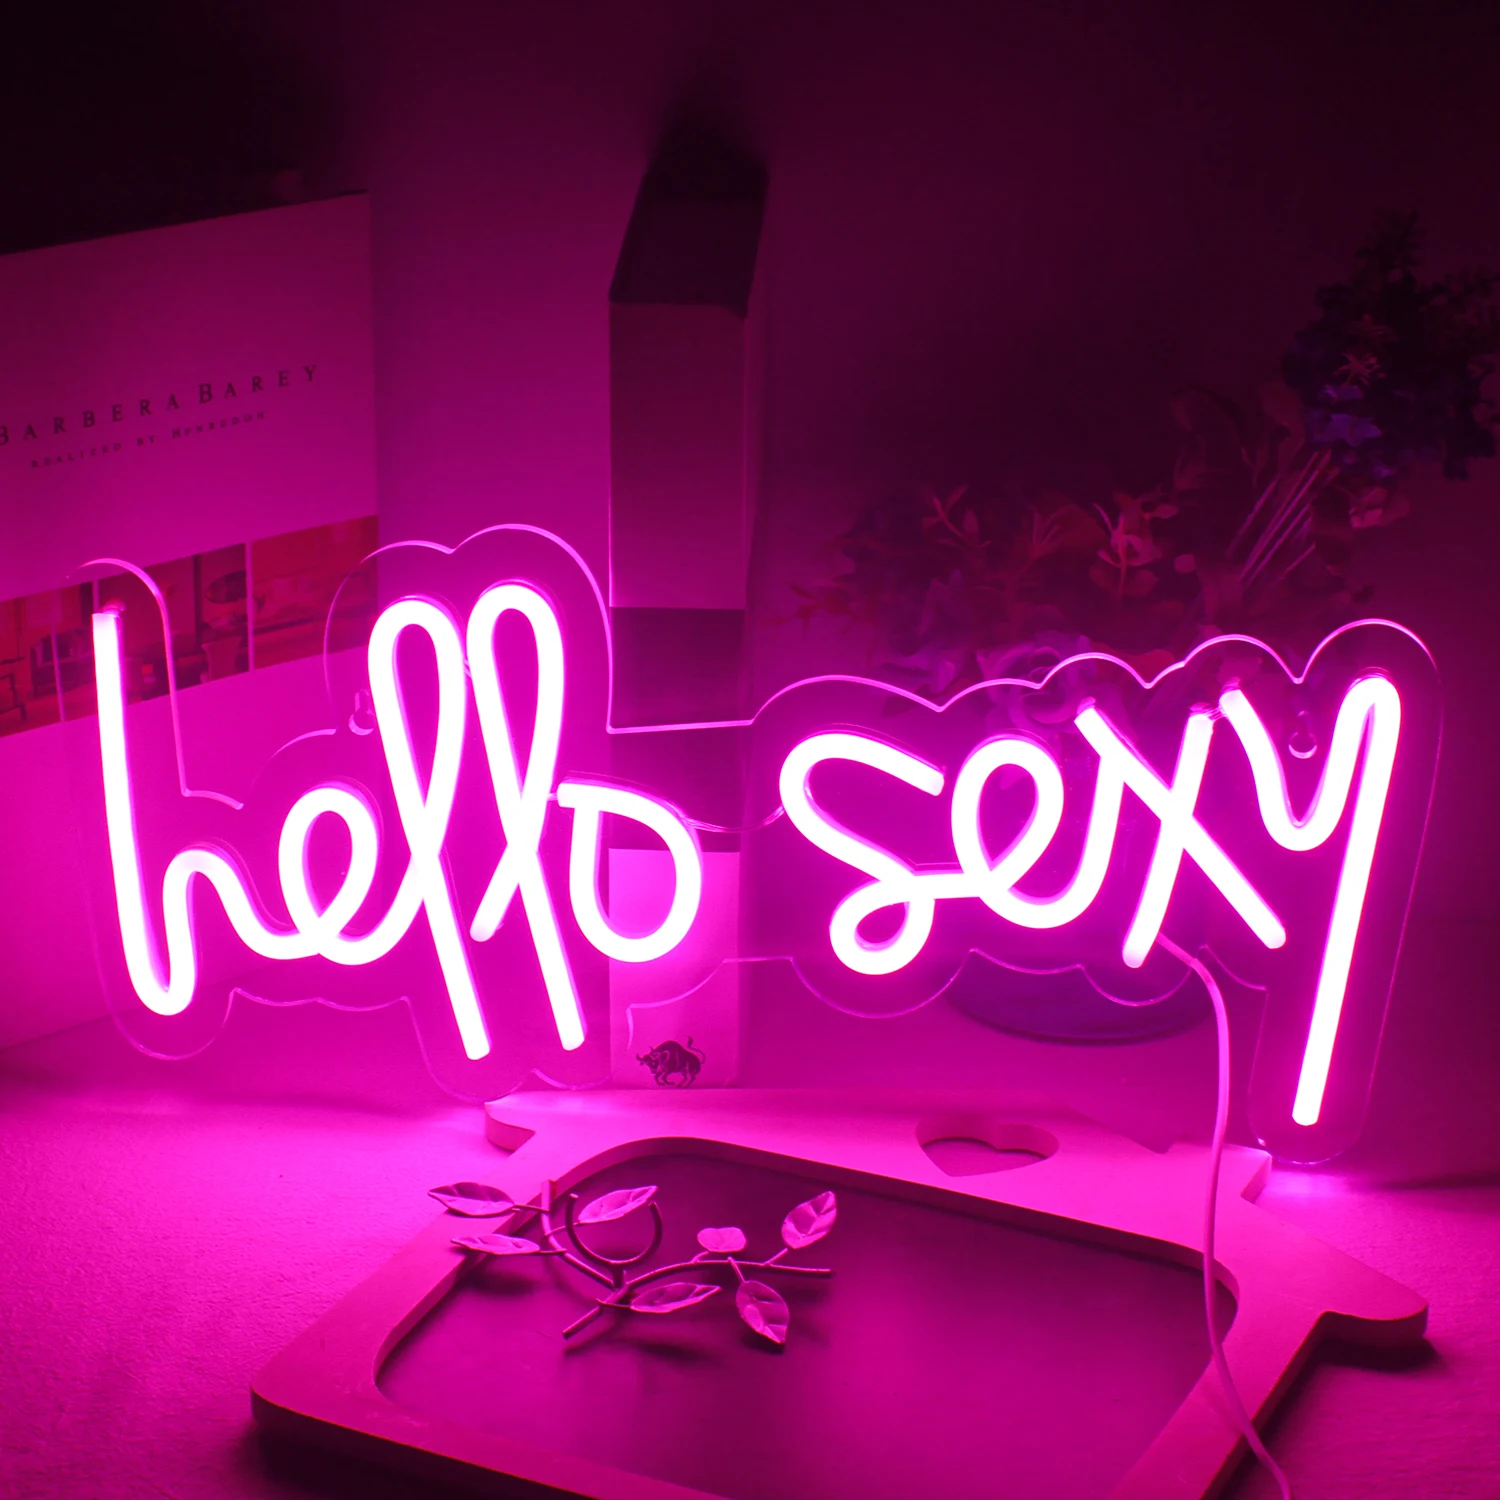 CHUANQI LED Girl Neon Sign Lights Hello Sexy Acrylic Hanging Bar Party Club Shop Aesthetic Room Home Bedroom Wall Decor Gift